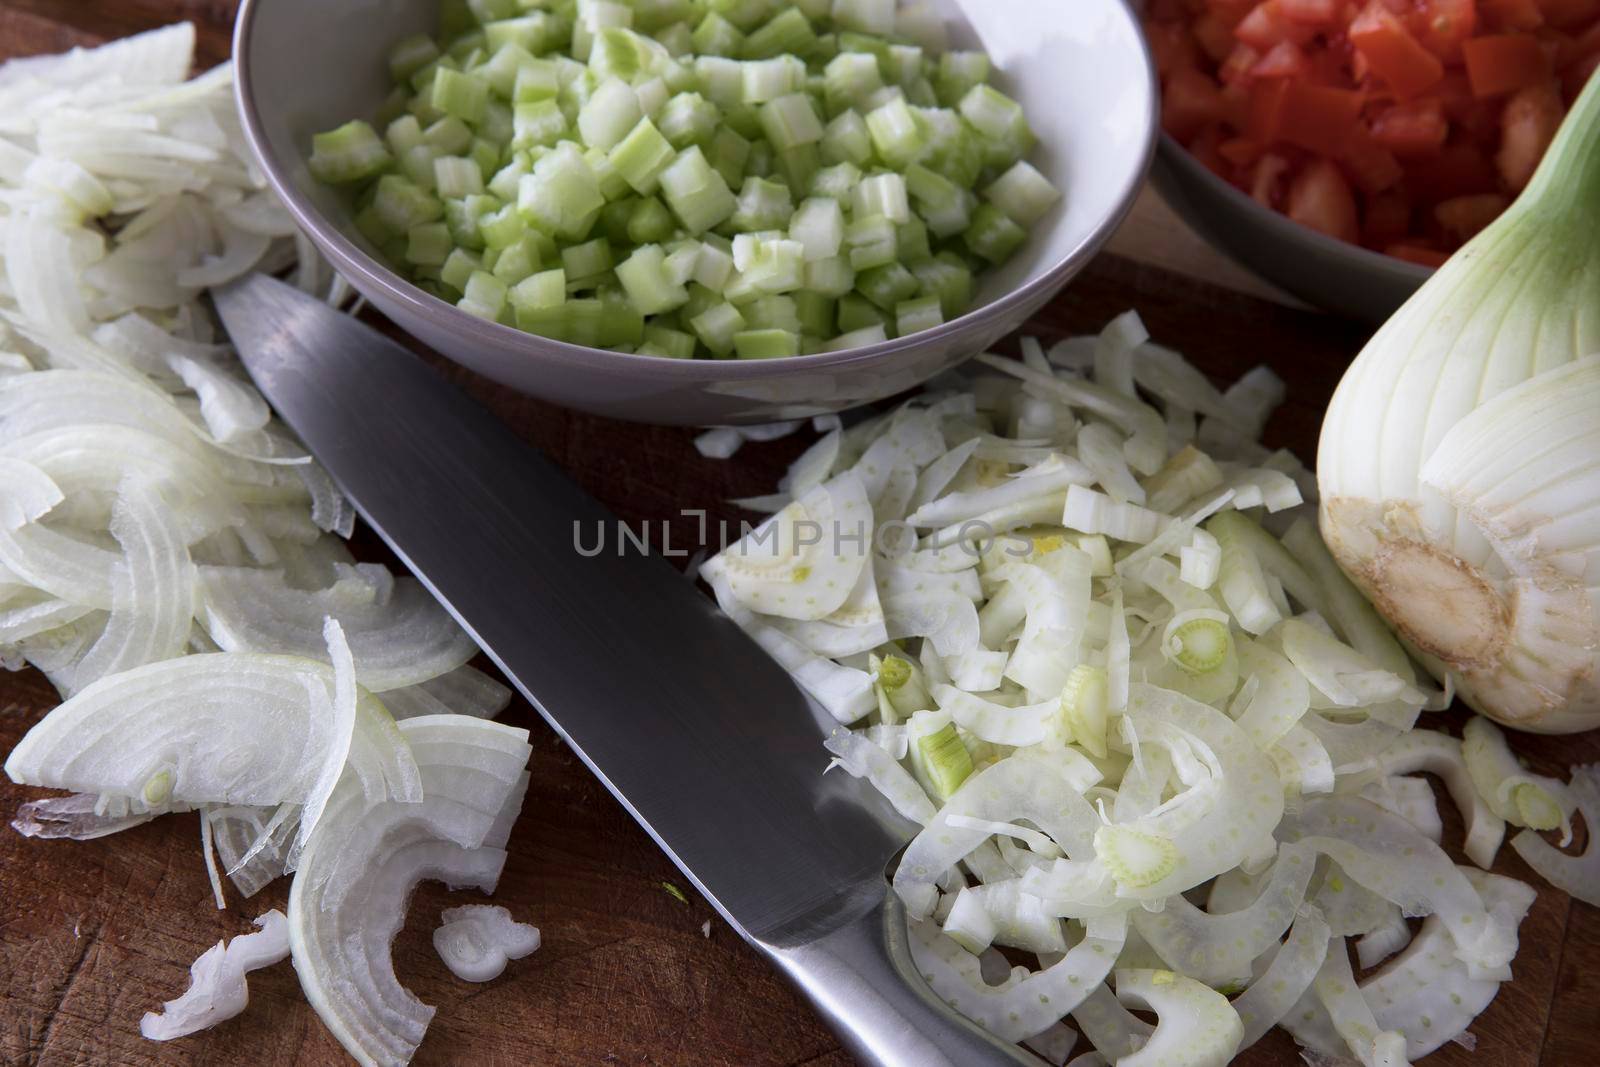 Sliced fennel and yellow onions with bowl of chpped celery and chef's knife on  a cutting board